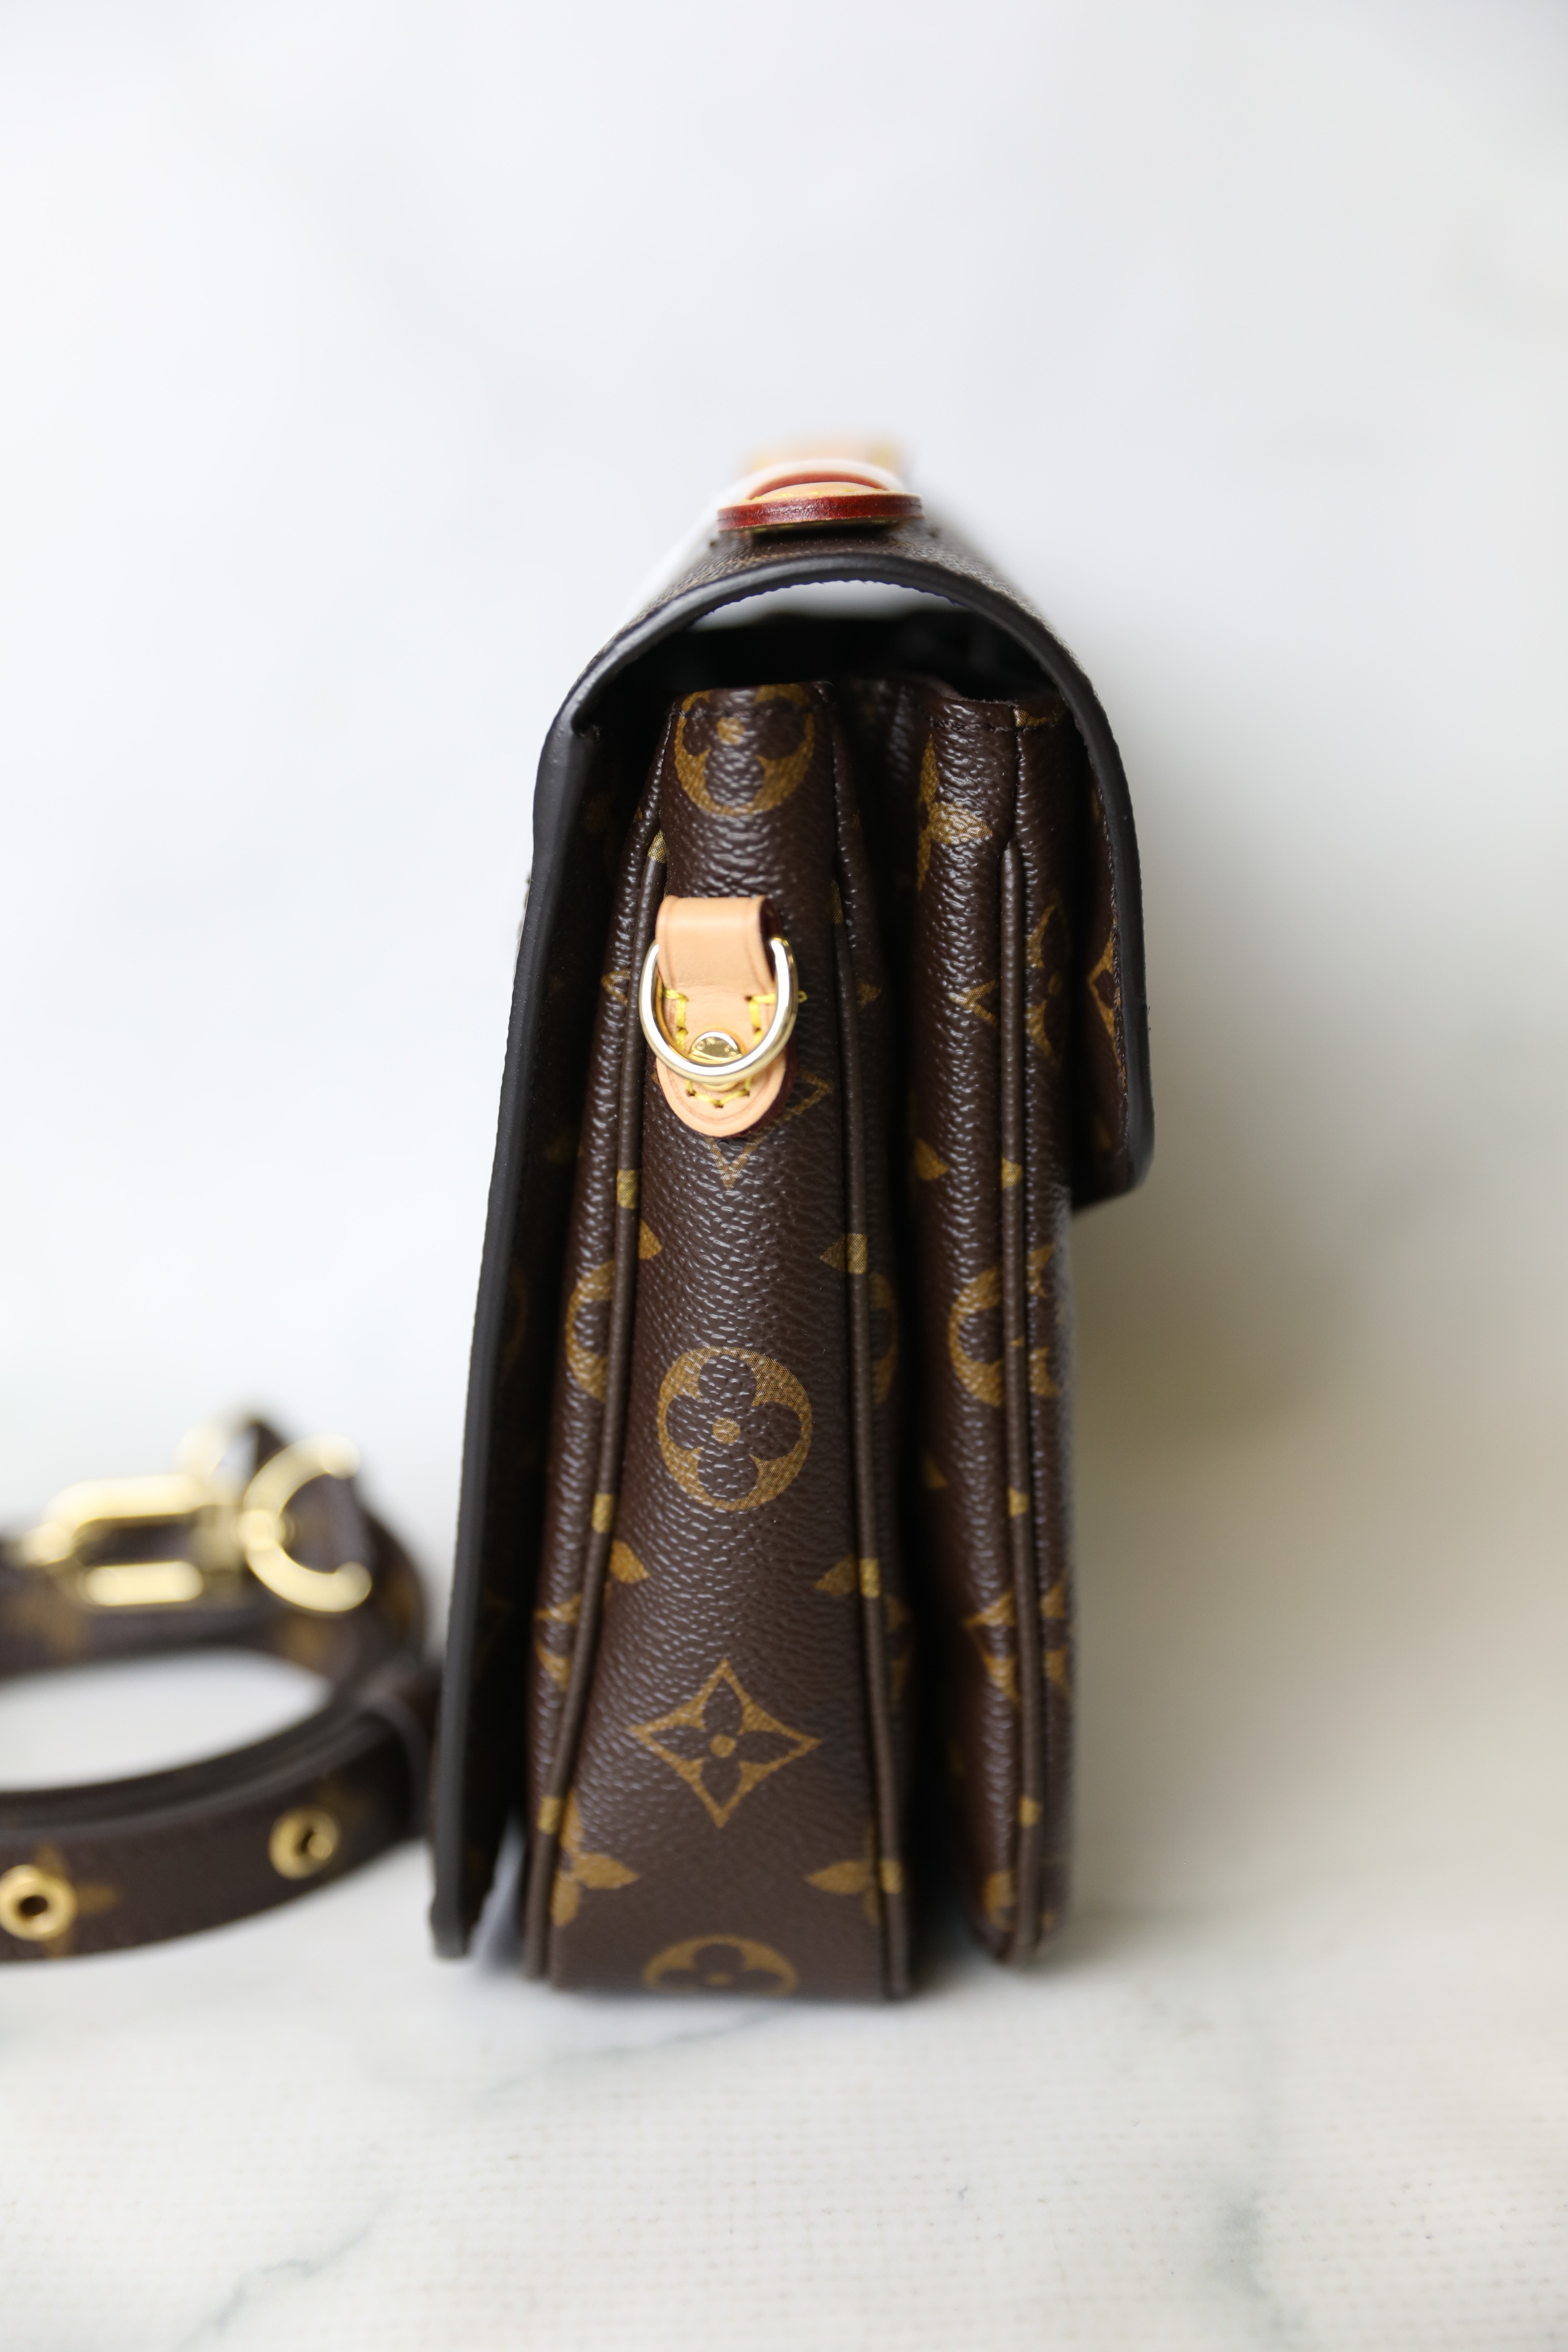 Louis Vuitton Pochette Metis, Black And Beige Leather With Gold Hardware,  Preowned In Box Wa001 - Julia Rose Boston